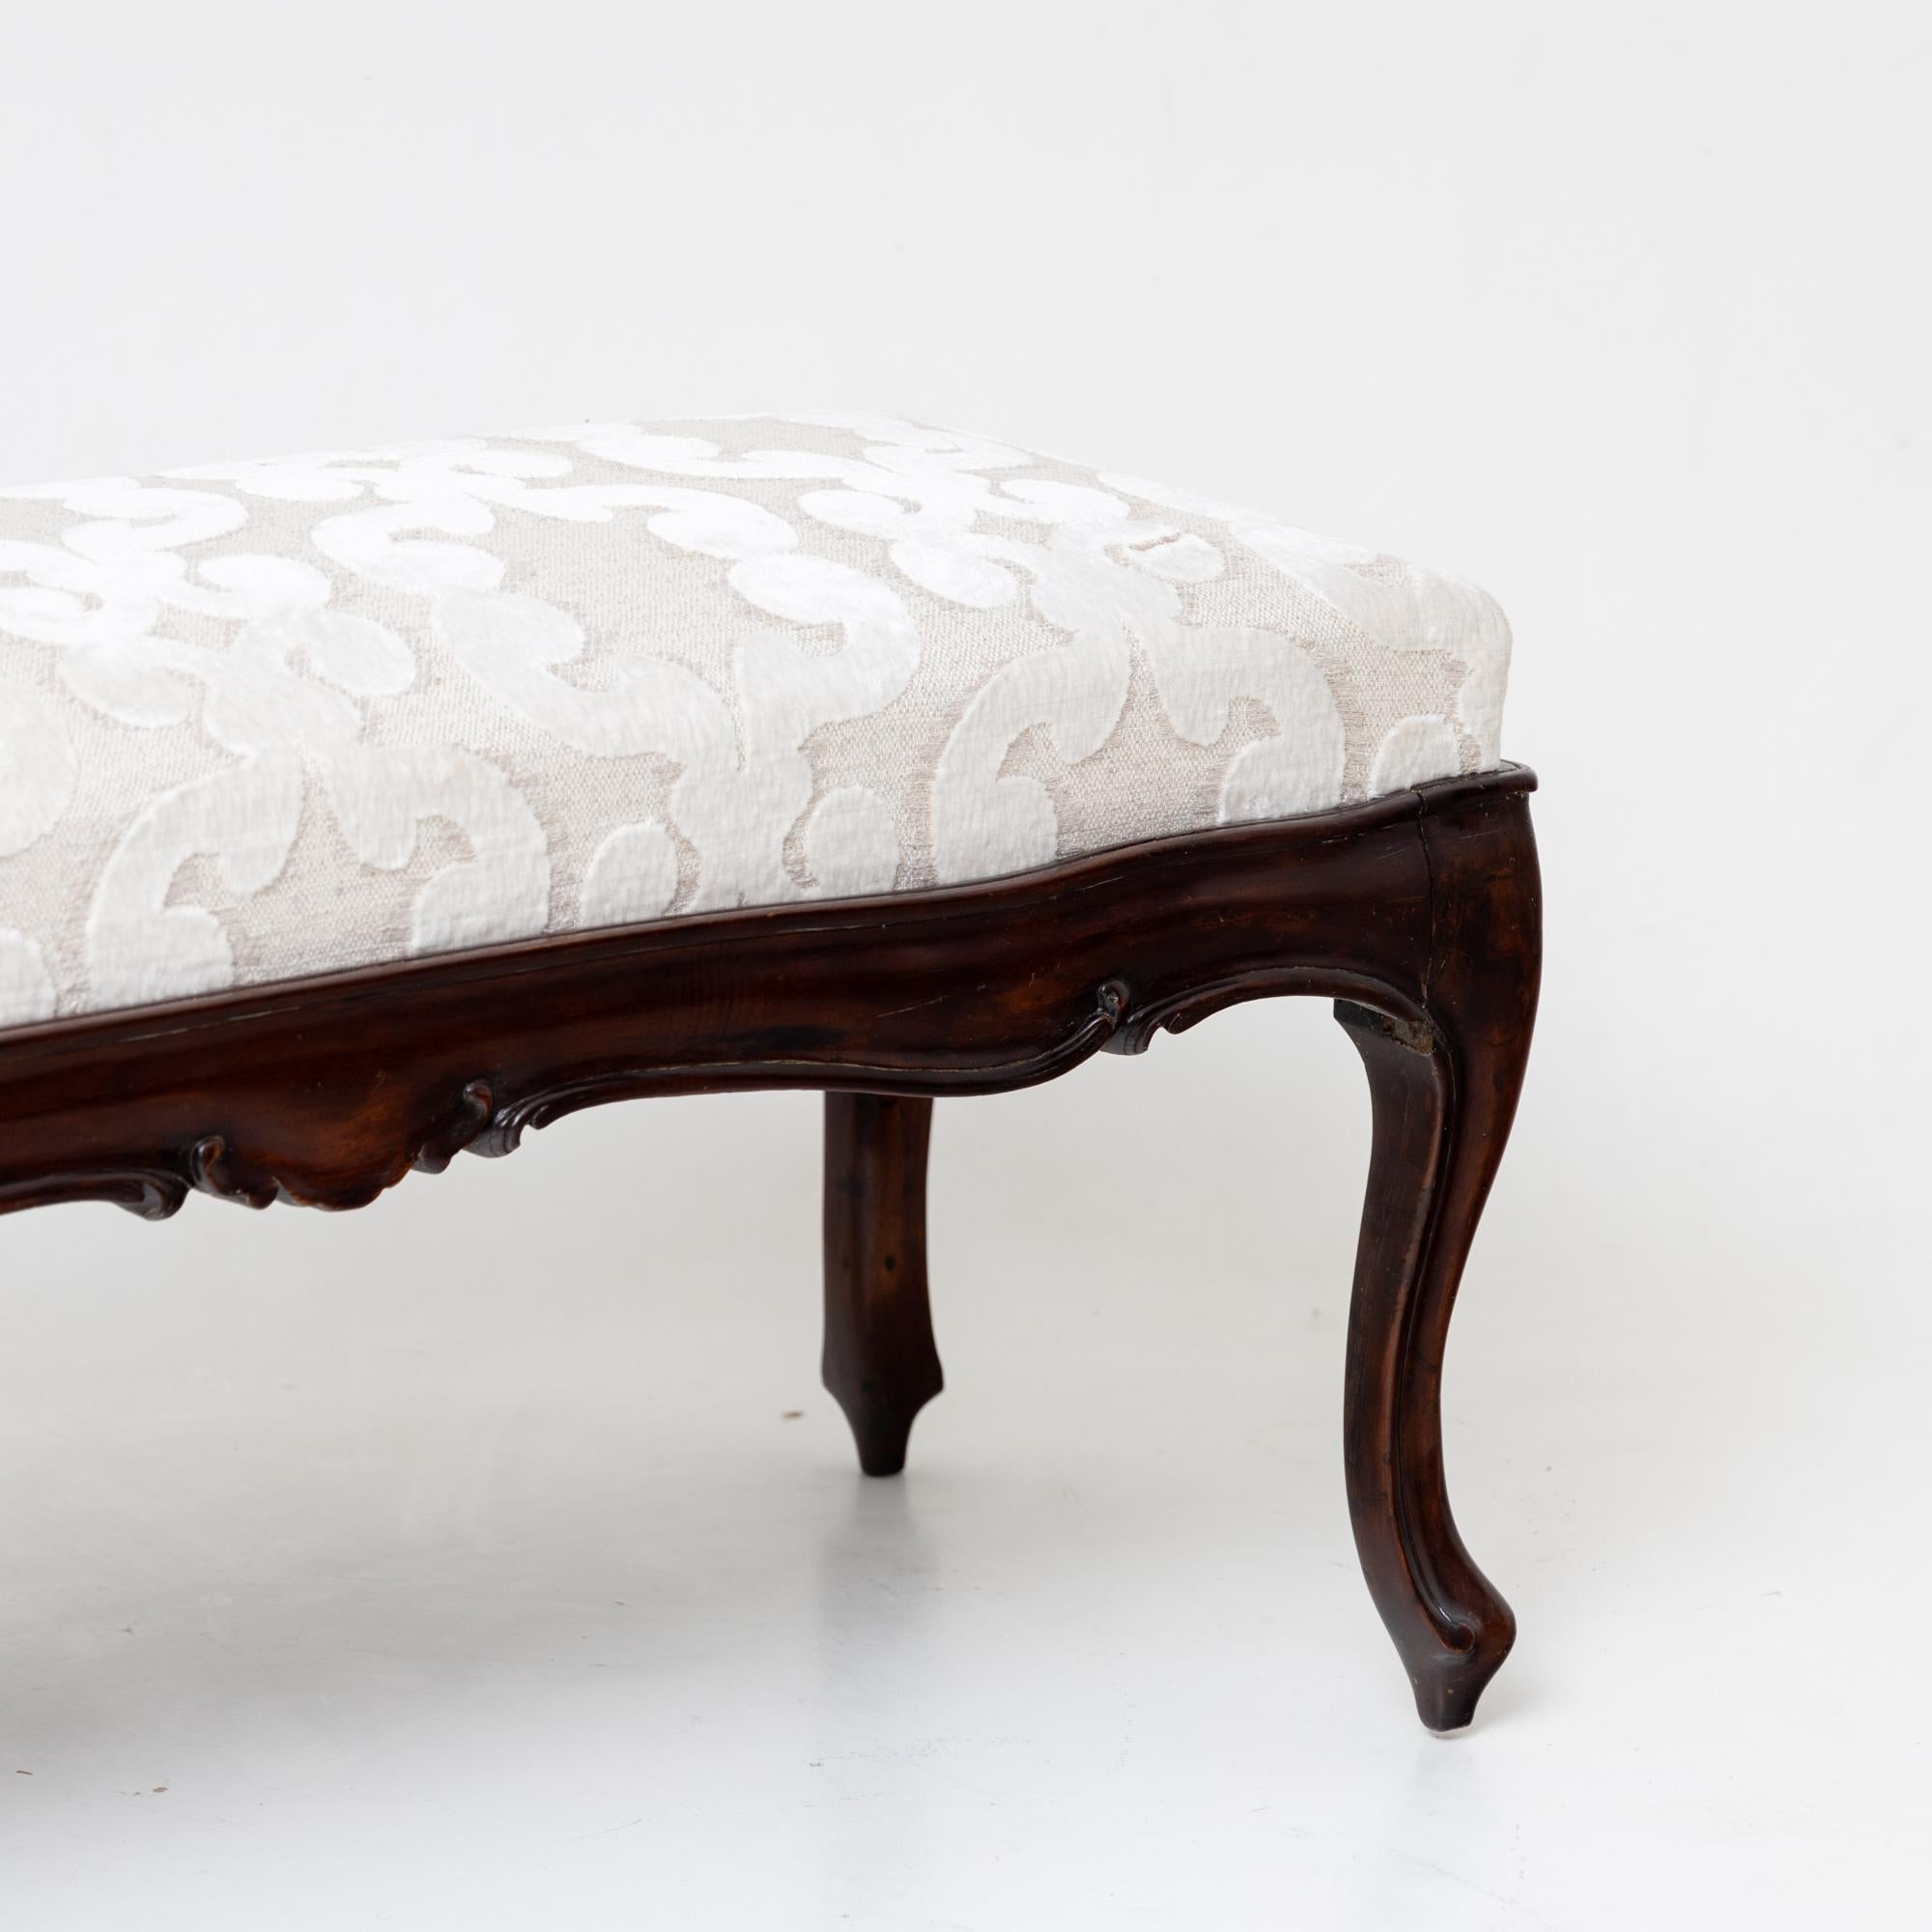 Small upholstered bench in baroque style with a multiple curved frame on elegant s-legs. This bench seats two people and has been reupholstered in a high quality cream and white fabric decorated with raised C-frame decoration. Frame height: 39 cm.